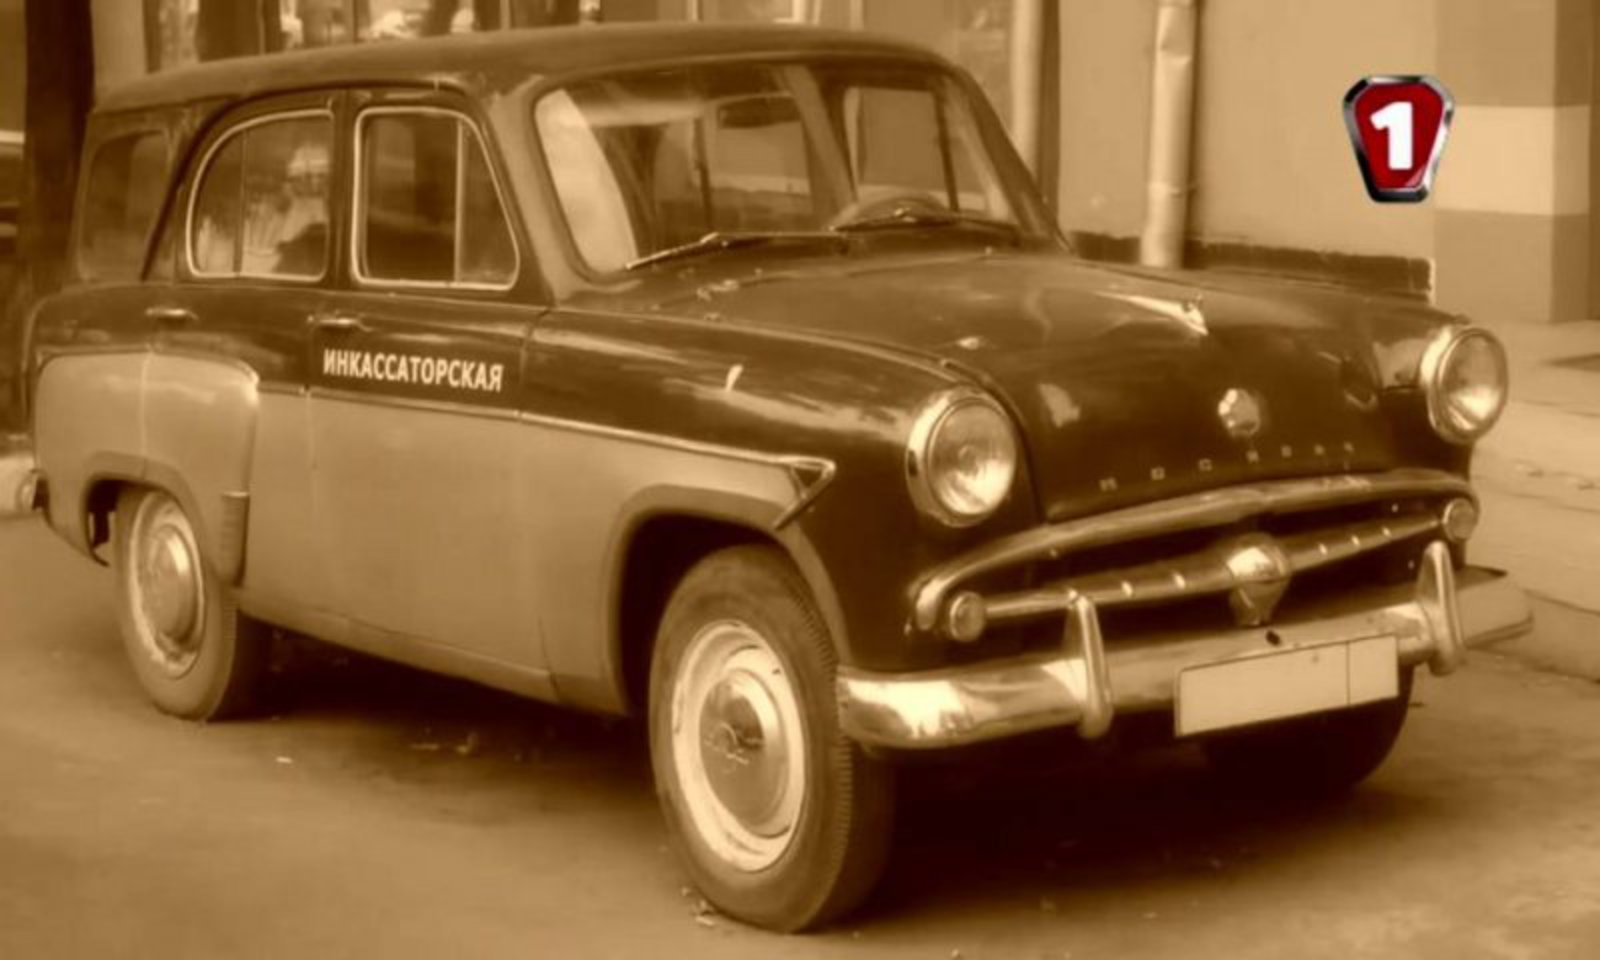 Moskvitch 412 combi Photo Gallery: Photo #05 out of 10, Image Size ...